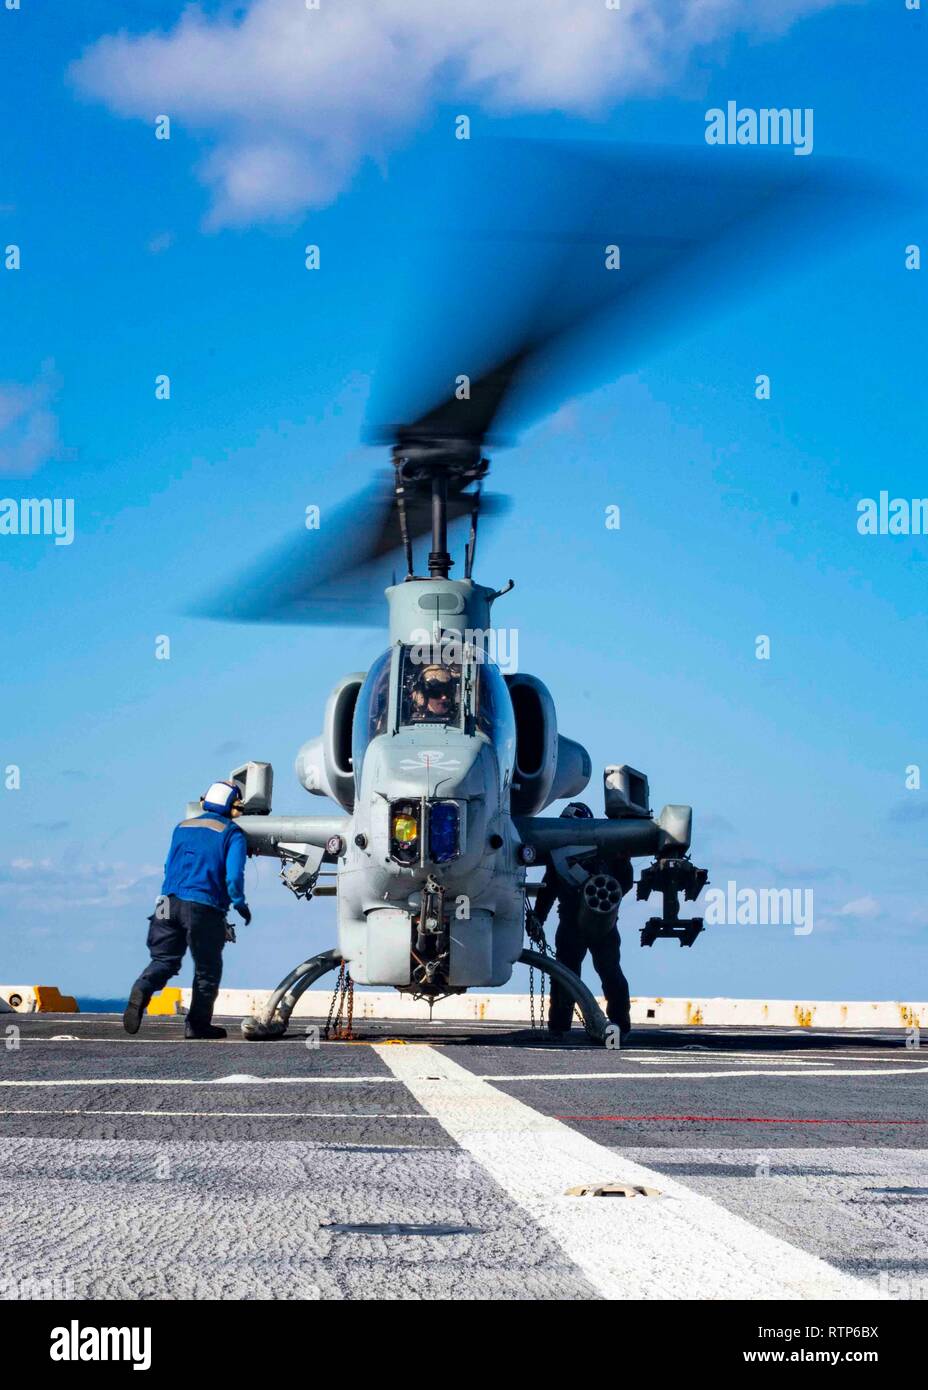 190226-N-HG389-0012 MEDITERRANEAN SEA (Feb. 26, 2019) Sailors remove chains on an AH-1W Super Cobra helicopter assigned to the “Black Knights” of Marine Medium Tiltrotor Squadron (VMM) 264 (Reinforced) on the flight deck of the San Antonio-class amphibious transport dock ship USS Arlington (LPD 24), Feb. 26, 2019. Arlington is on a scheduled deployment as part of the Kearsarge Amphibious Ready Group in support of maritime security operations, crisis response and theater security cooperation, while also providing a forward naval presence. (U.S. Navy photo by Mass Communication Specialist 2nd Cl Stock Photo